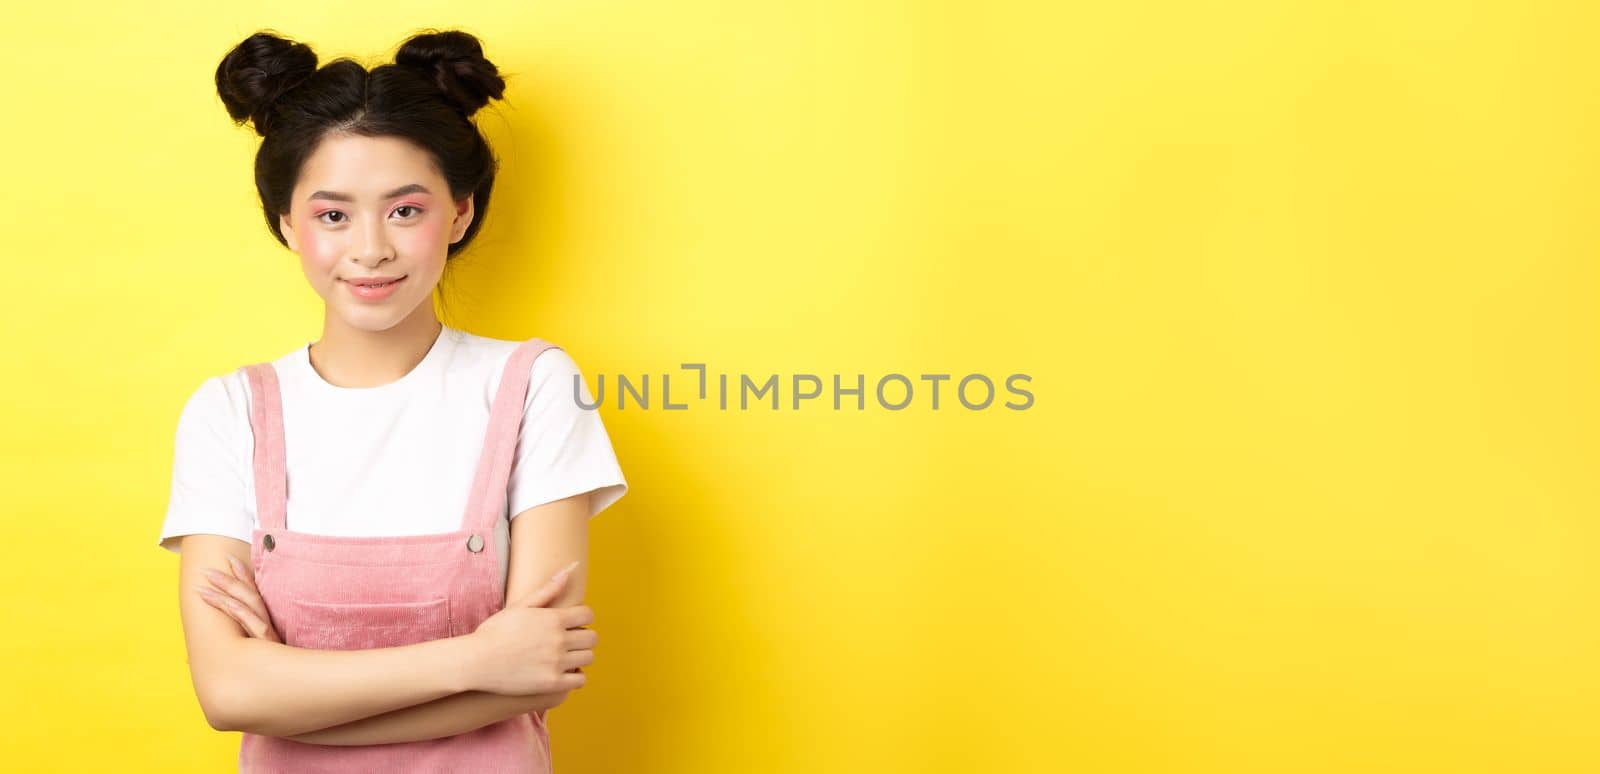 Beauty asian girl with glamour makeup, cross arms on chest and smiling tenderly at camera, standing on yellow background.